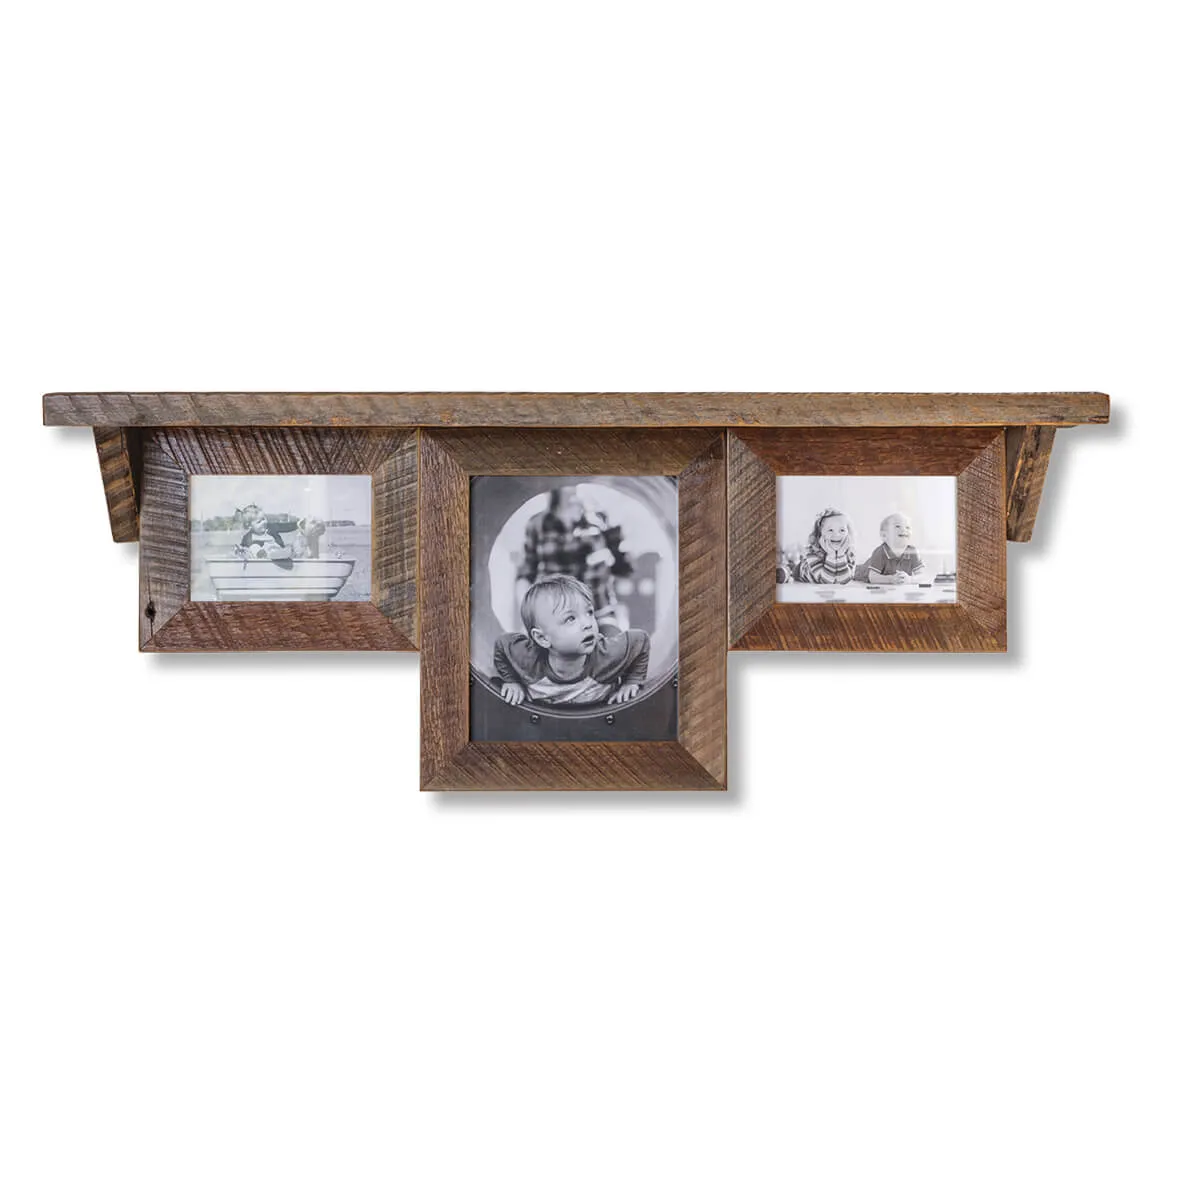 14 x 37 Wall Shelf with Picture Frames